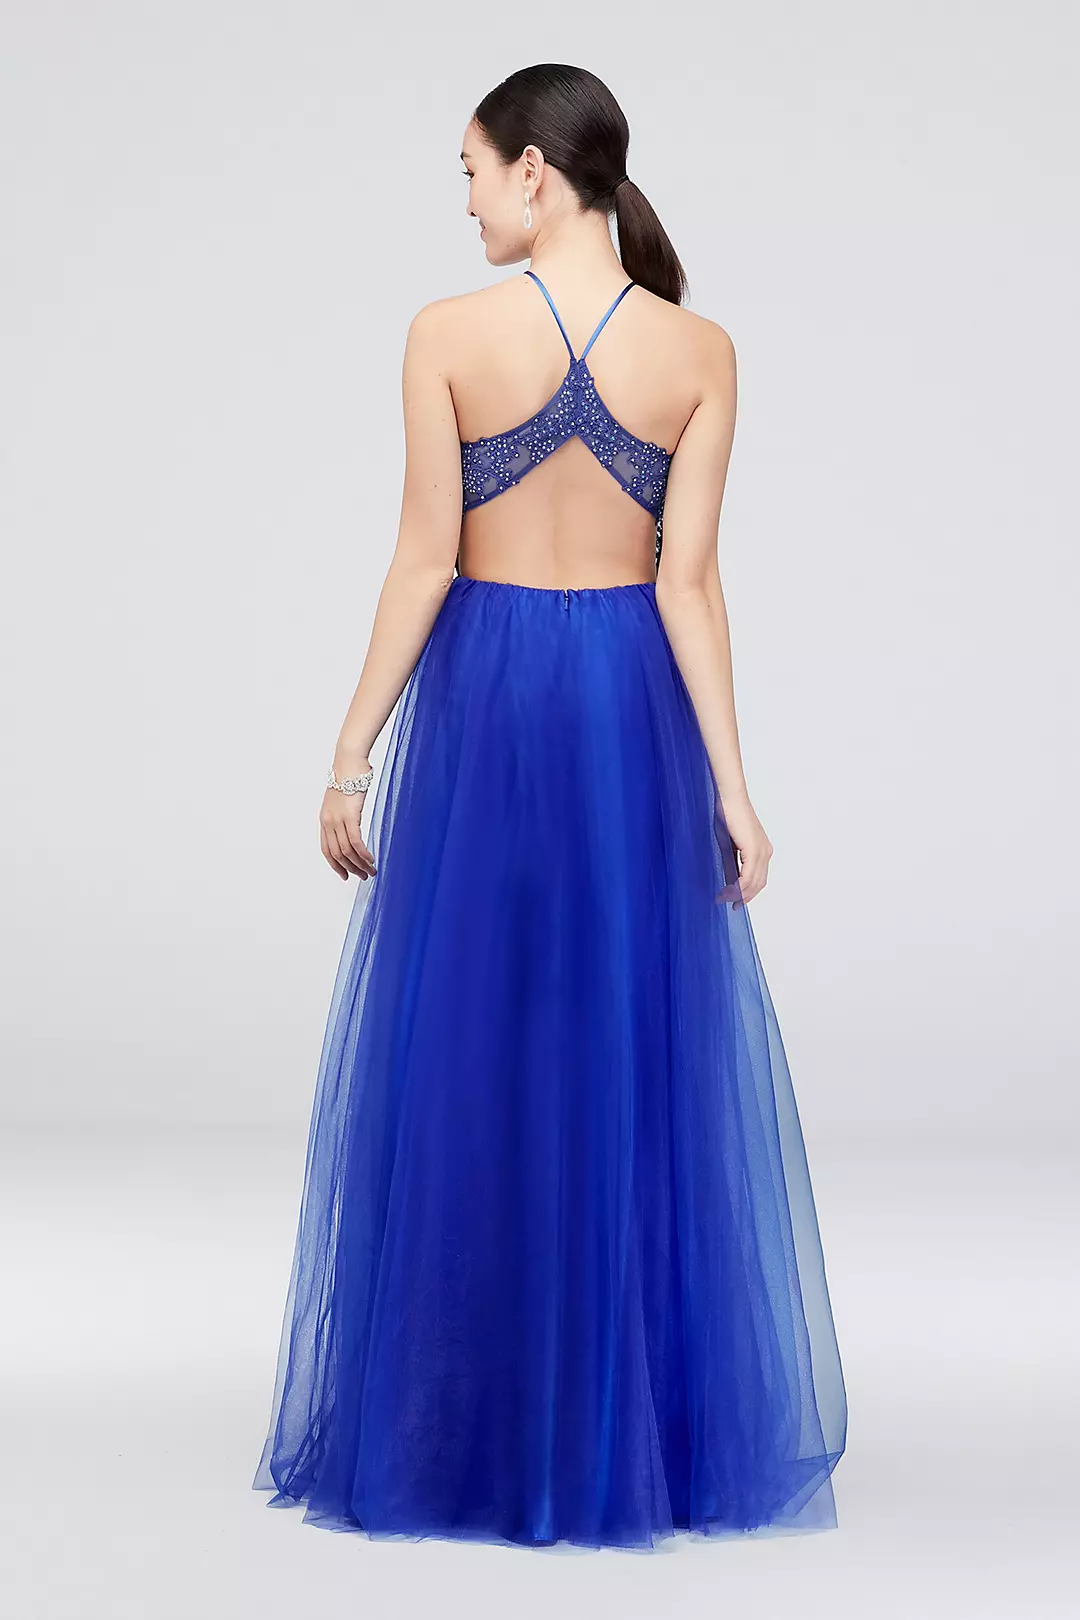 Mesh Illusion Halter Ball Gown with Flowy Skirt Image 2